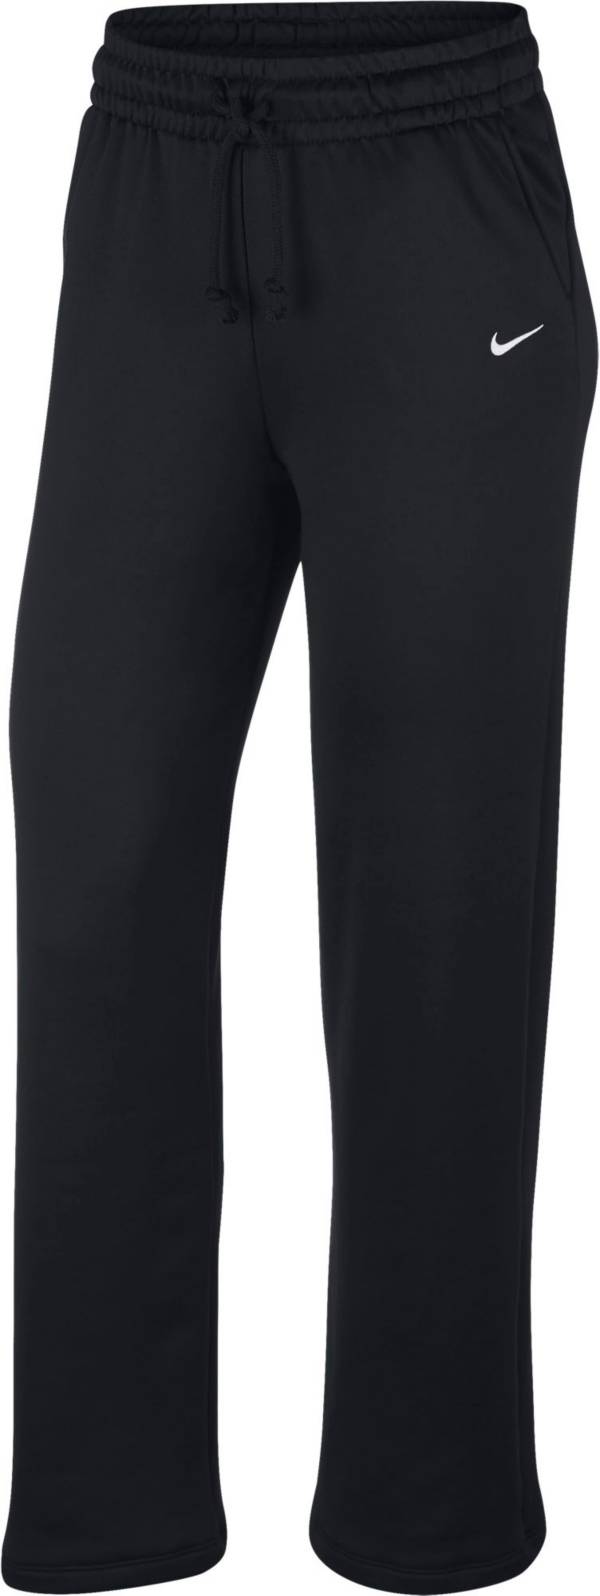 Nike Women's Therma All Time Classic Pants product image